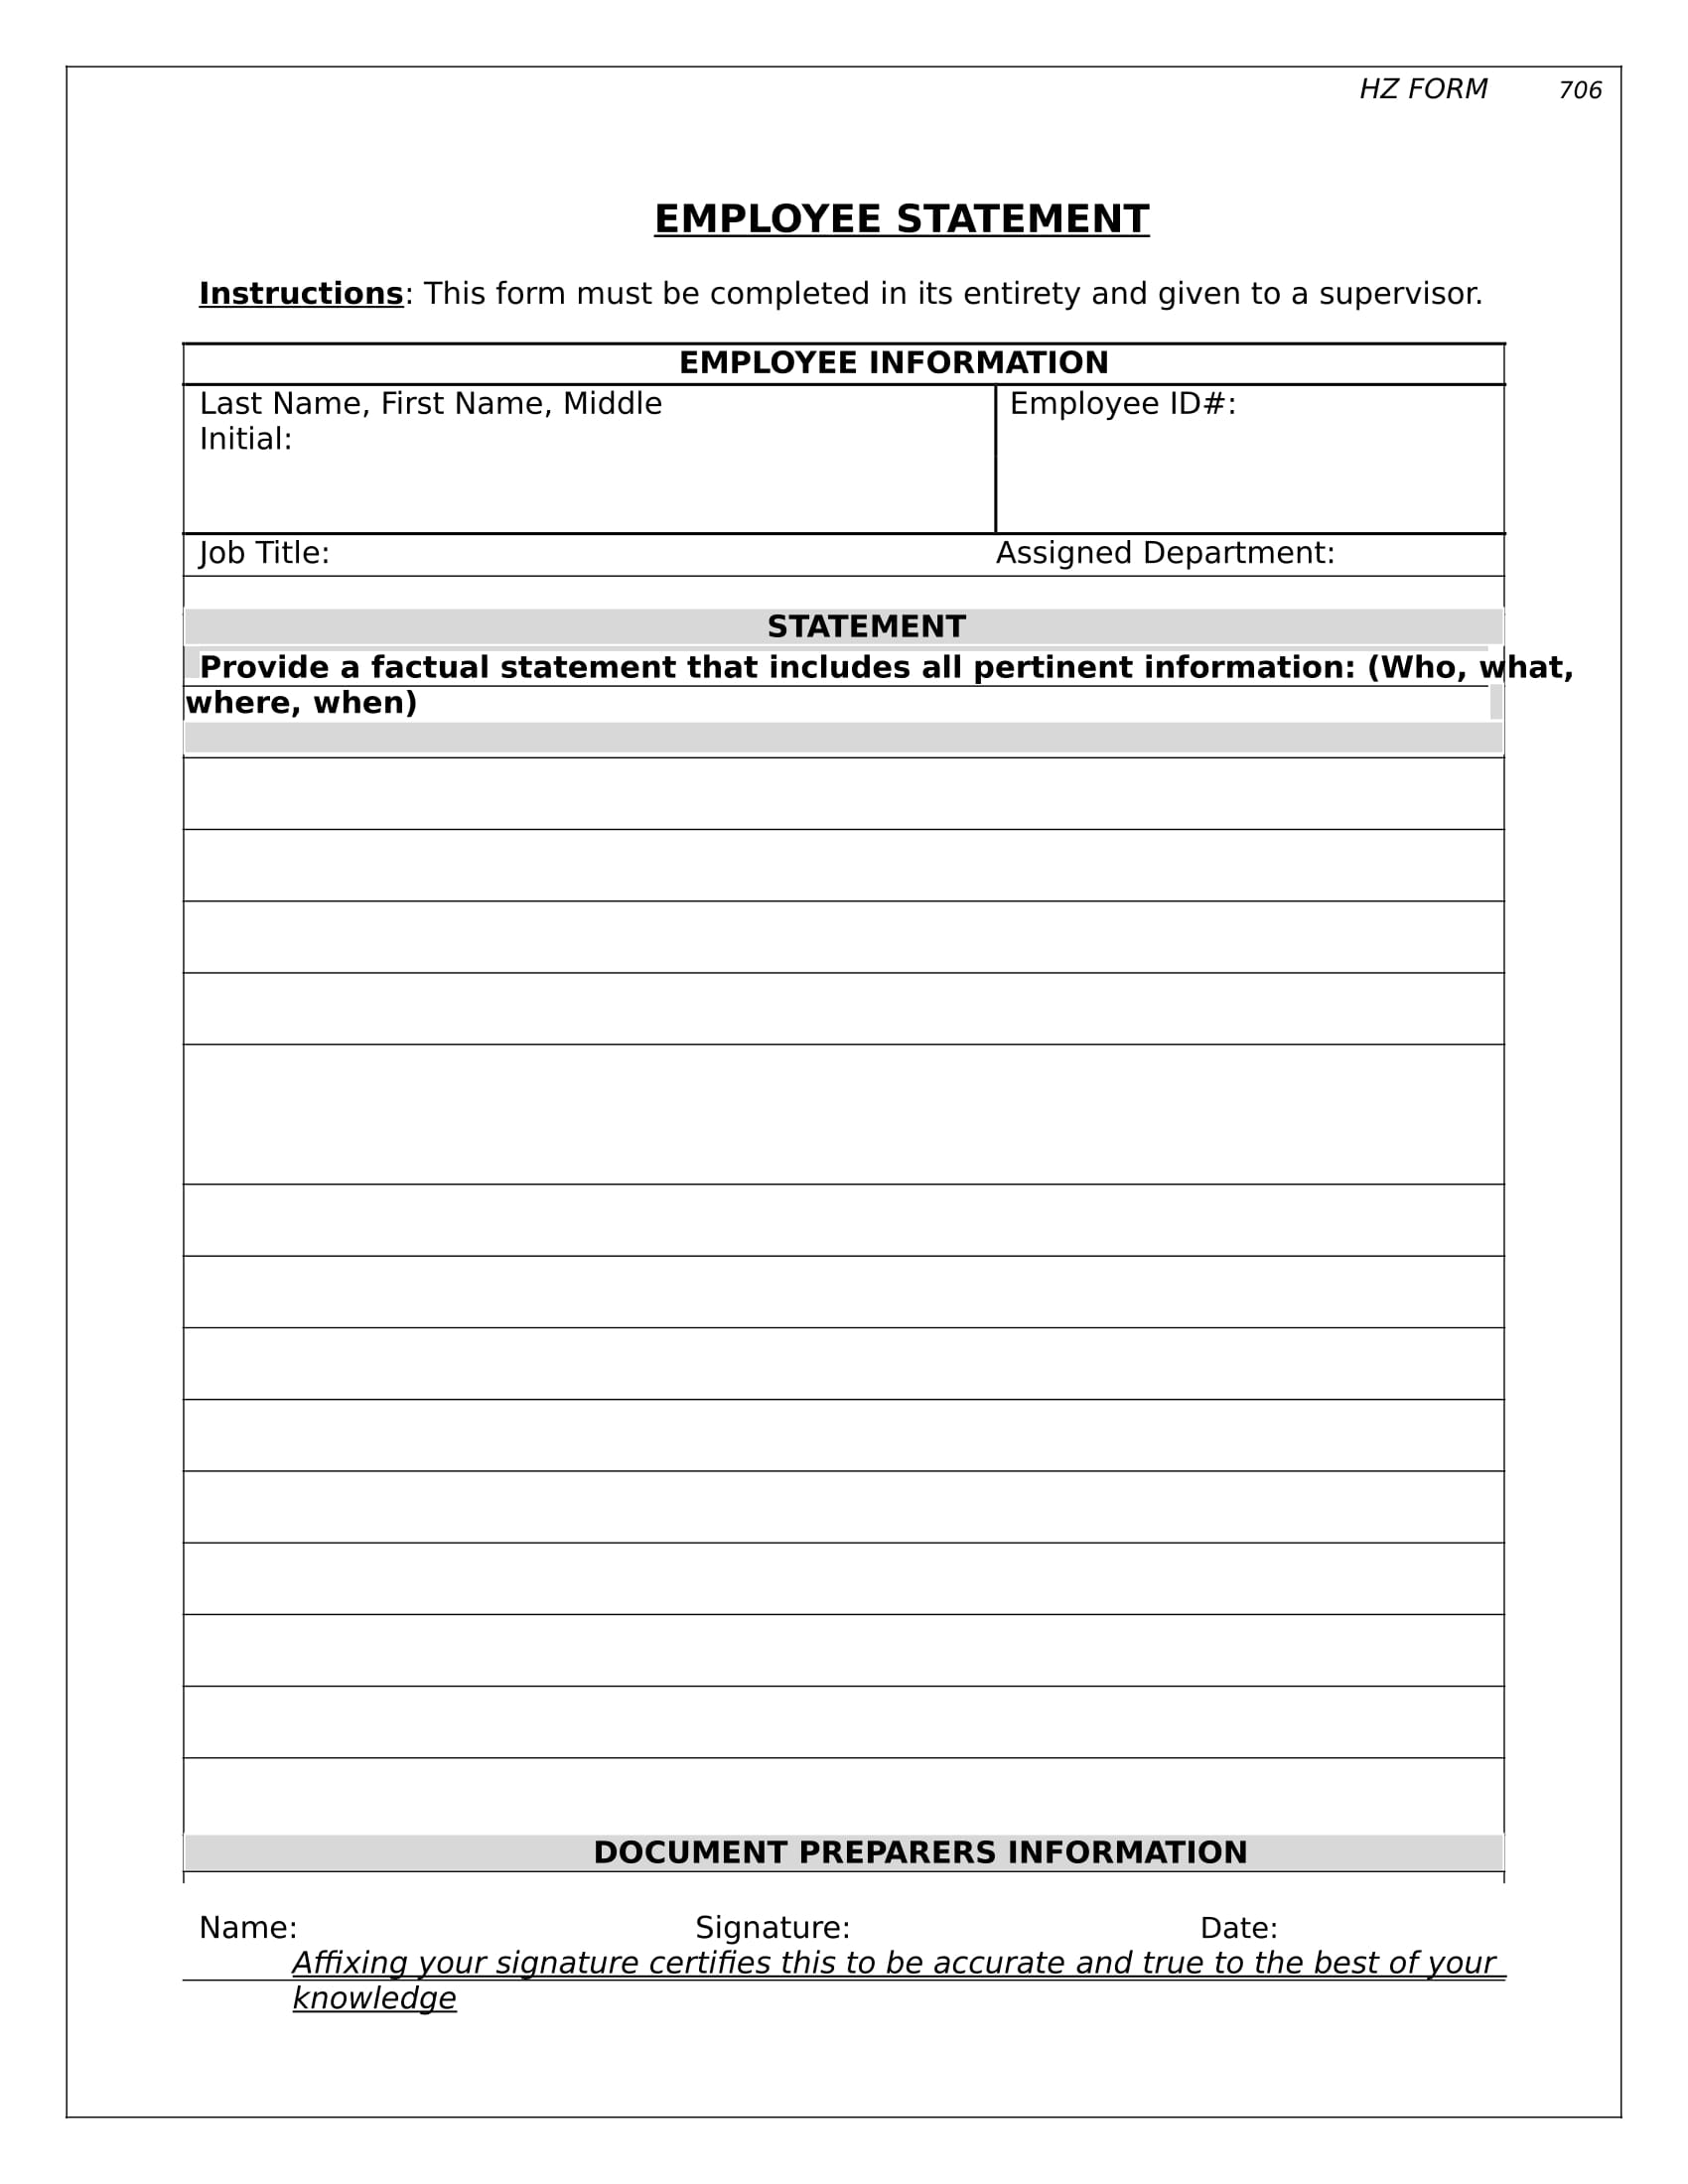 Employee Statement Sheet Hot Sex Picture